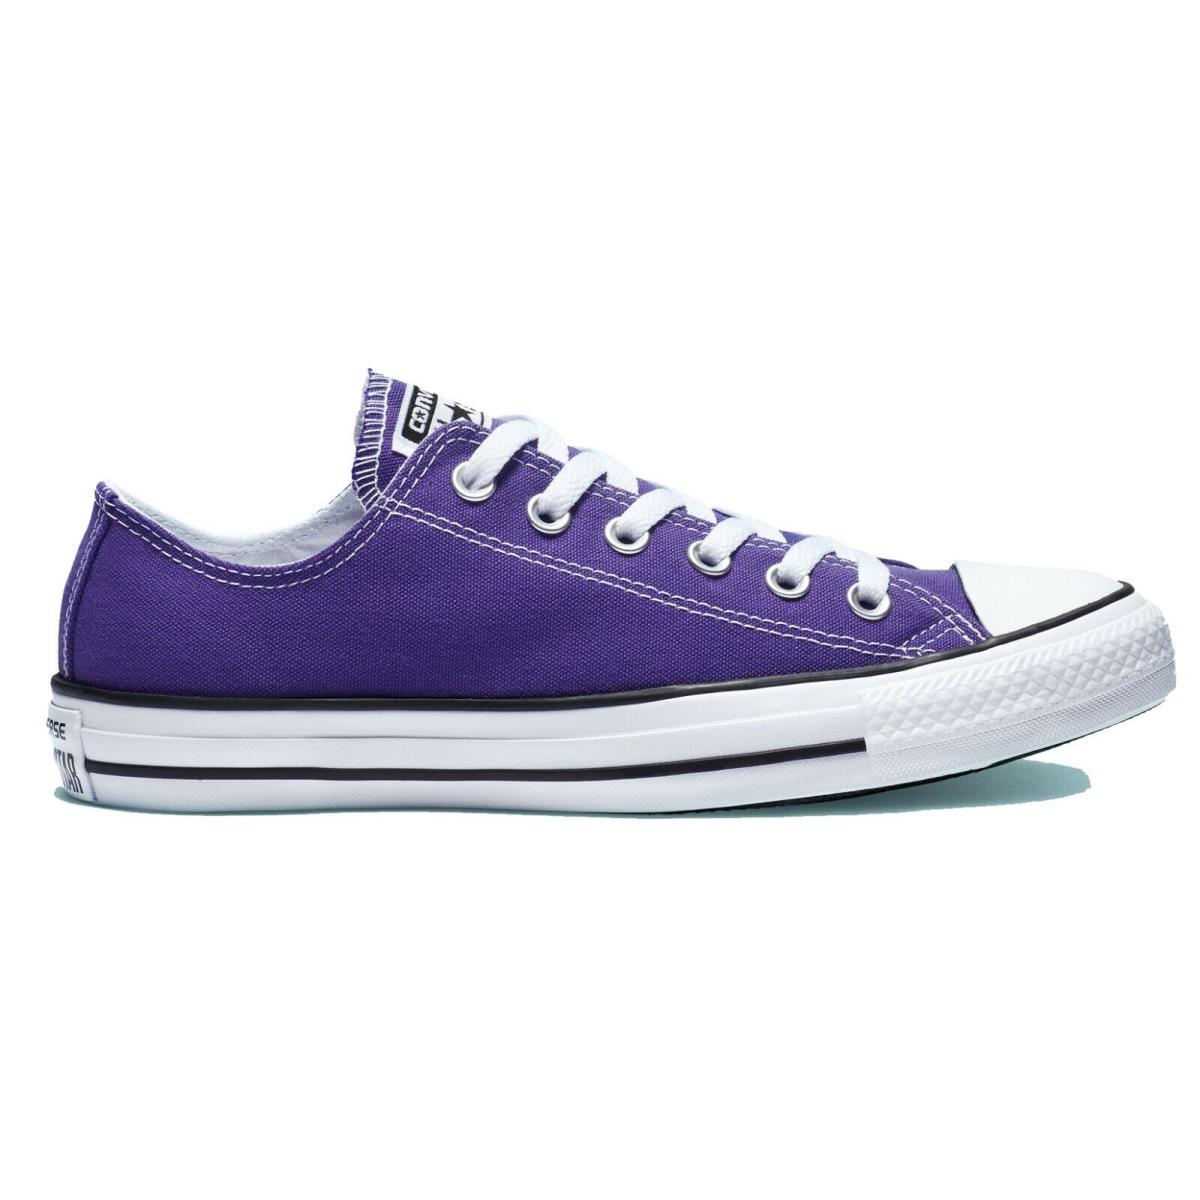 Classic Converse Unisex Chuck Taylor All Star Low Sneaker Canvas Upper Mens Size Purple